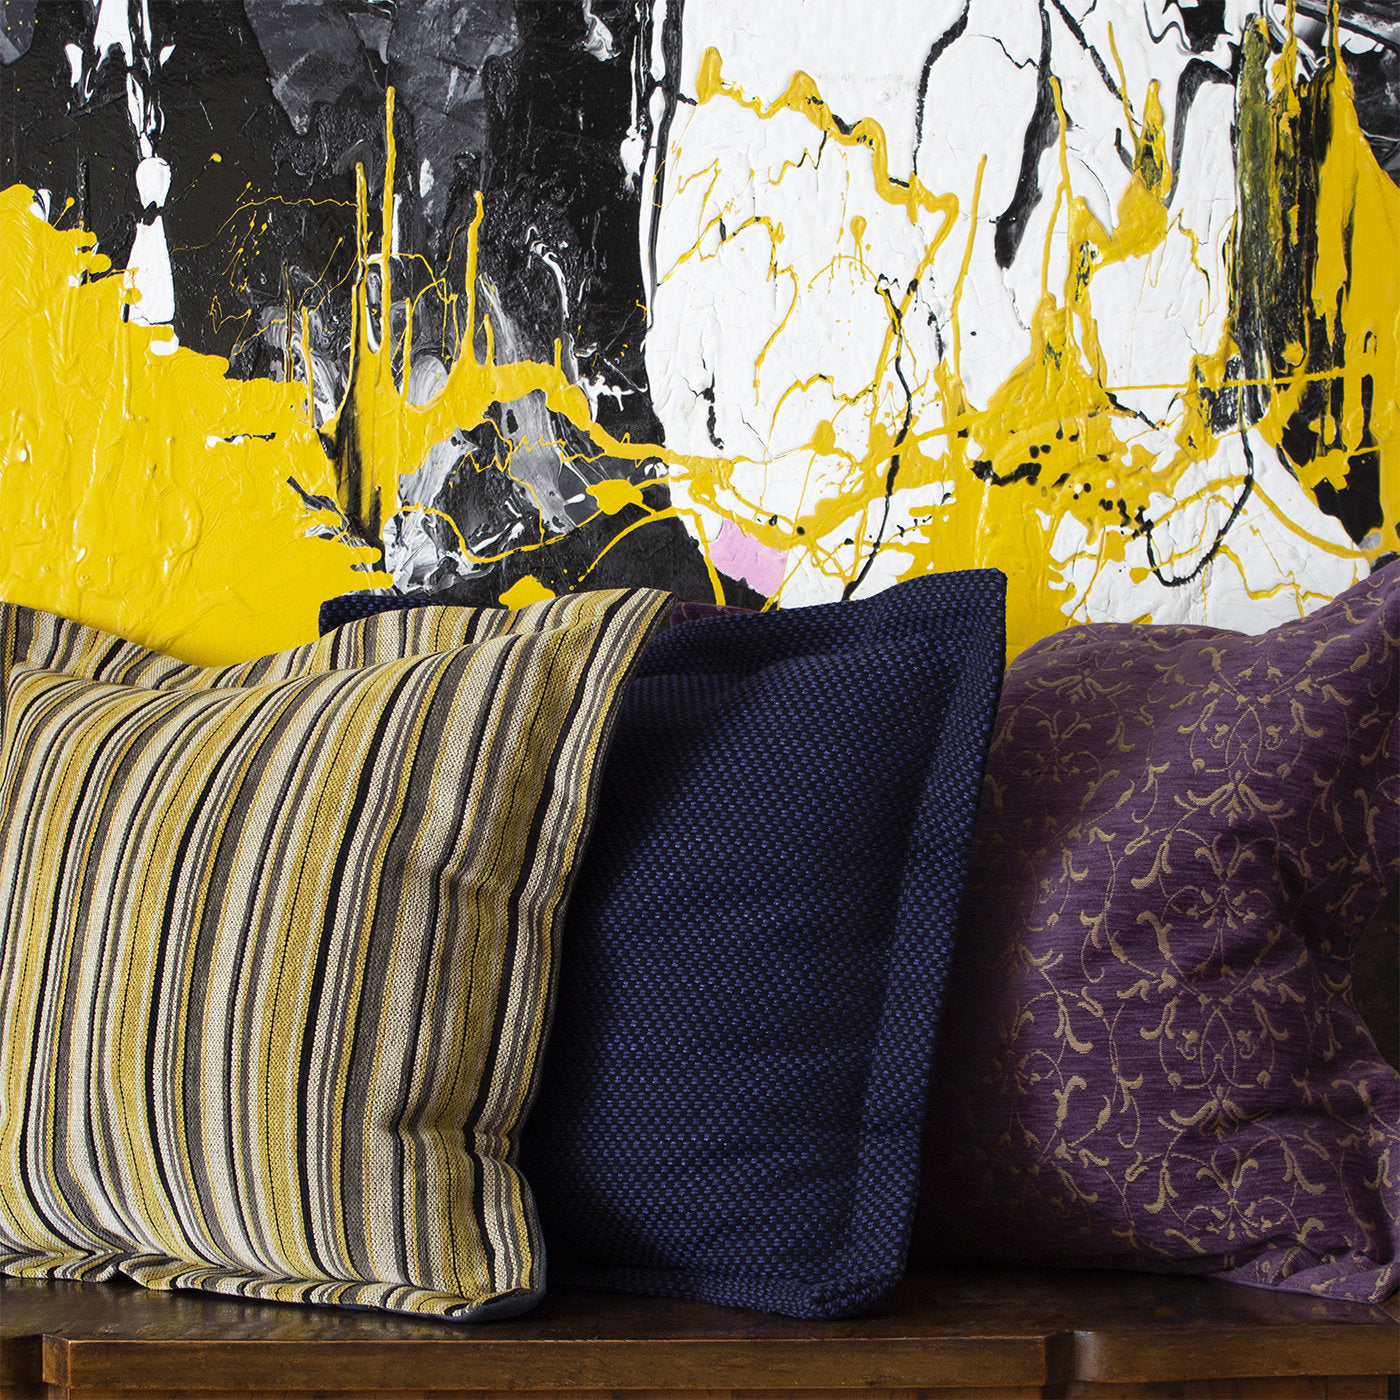 Set of 2 Over-Sized Mustard Lush Cushions  - Alternative view 4